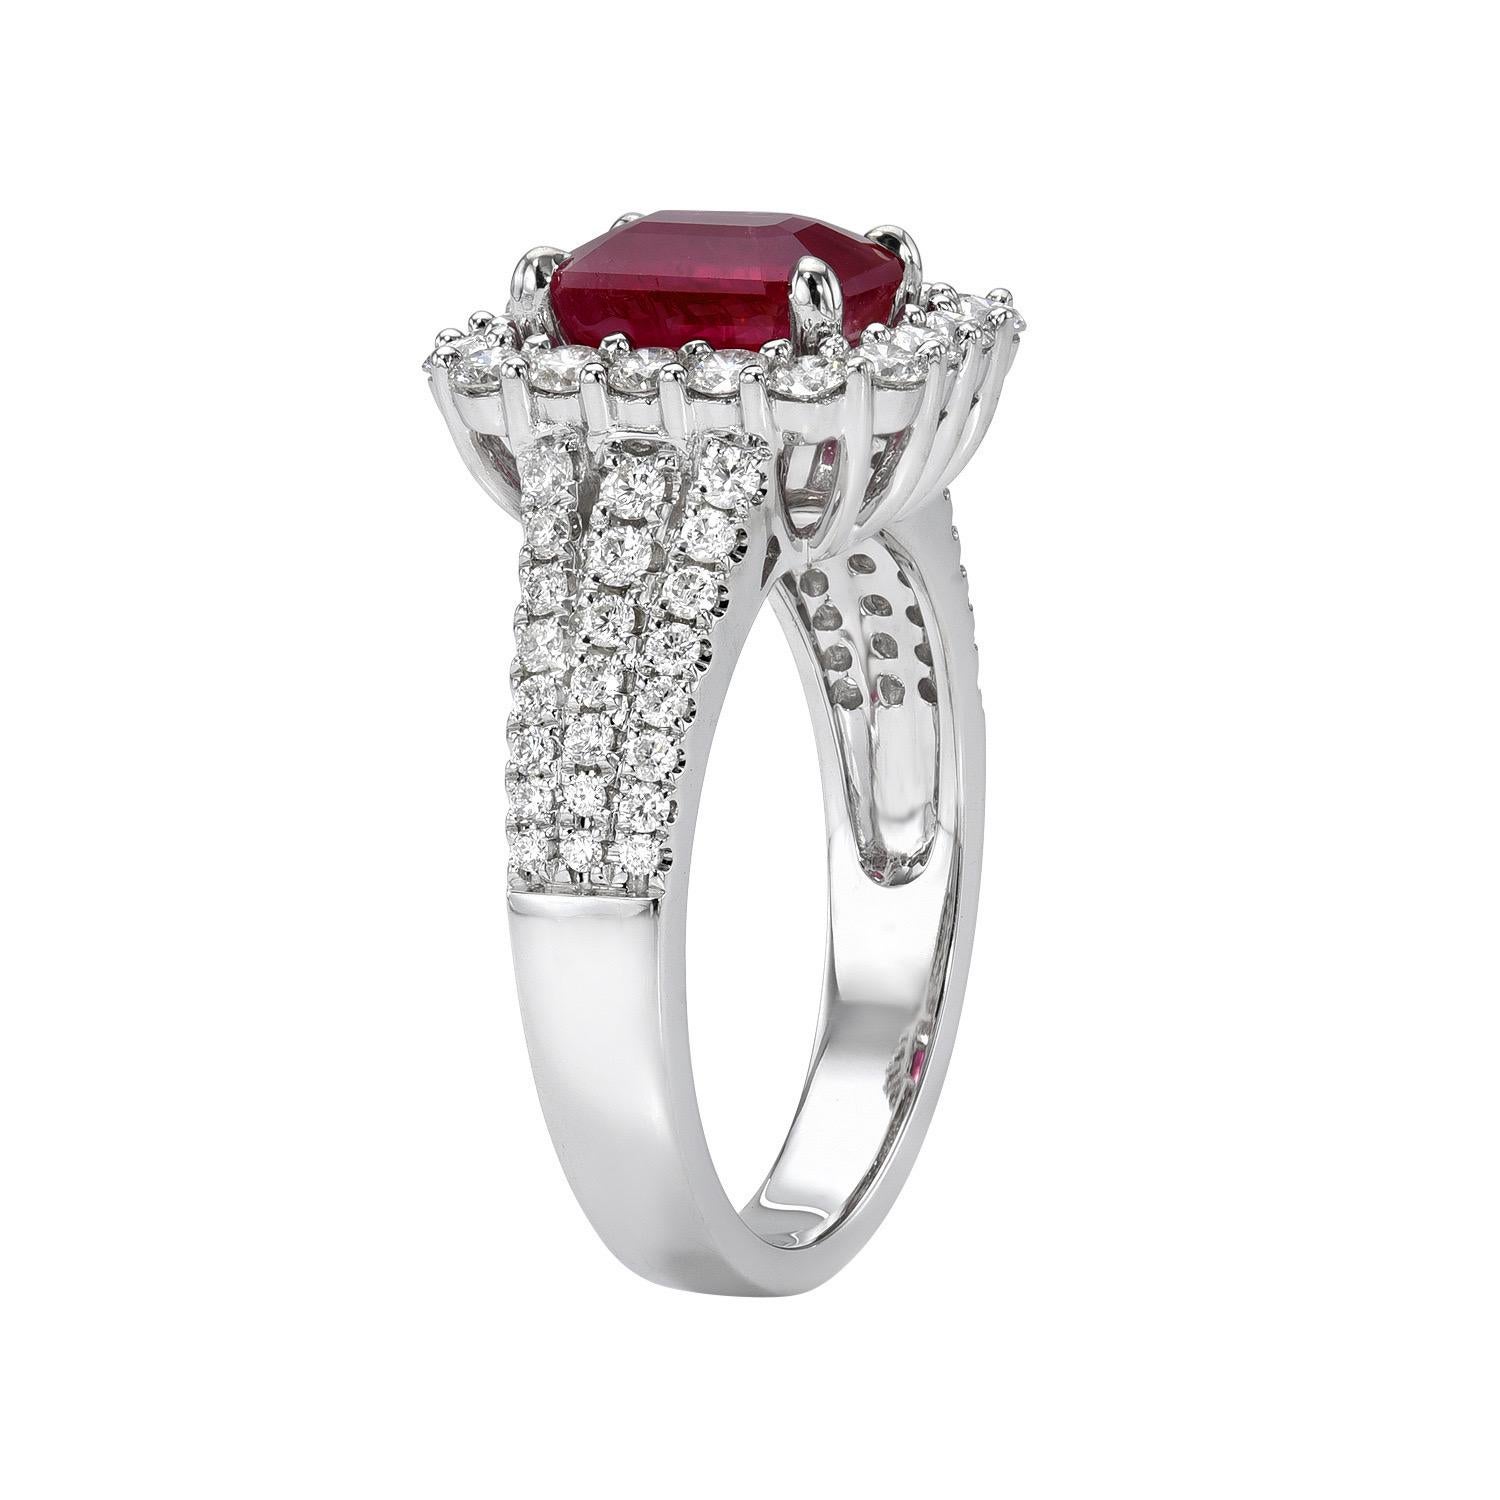 Gorgeous 2.05 carat Ruby emerald-cut 18K white gold ring, decorated with round brilliant diamonds totaling 0.88 carats.
Ring size 6.5. Resizing is complementary upon request.
Returns are accepted and paid by us within 7 days of delivery.